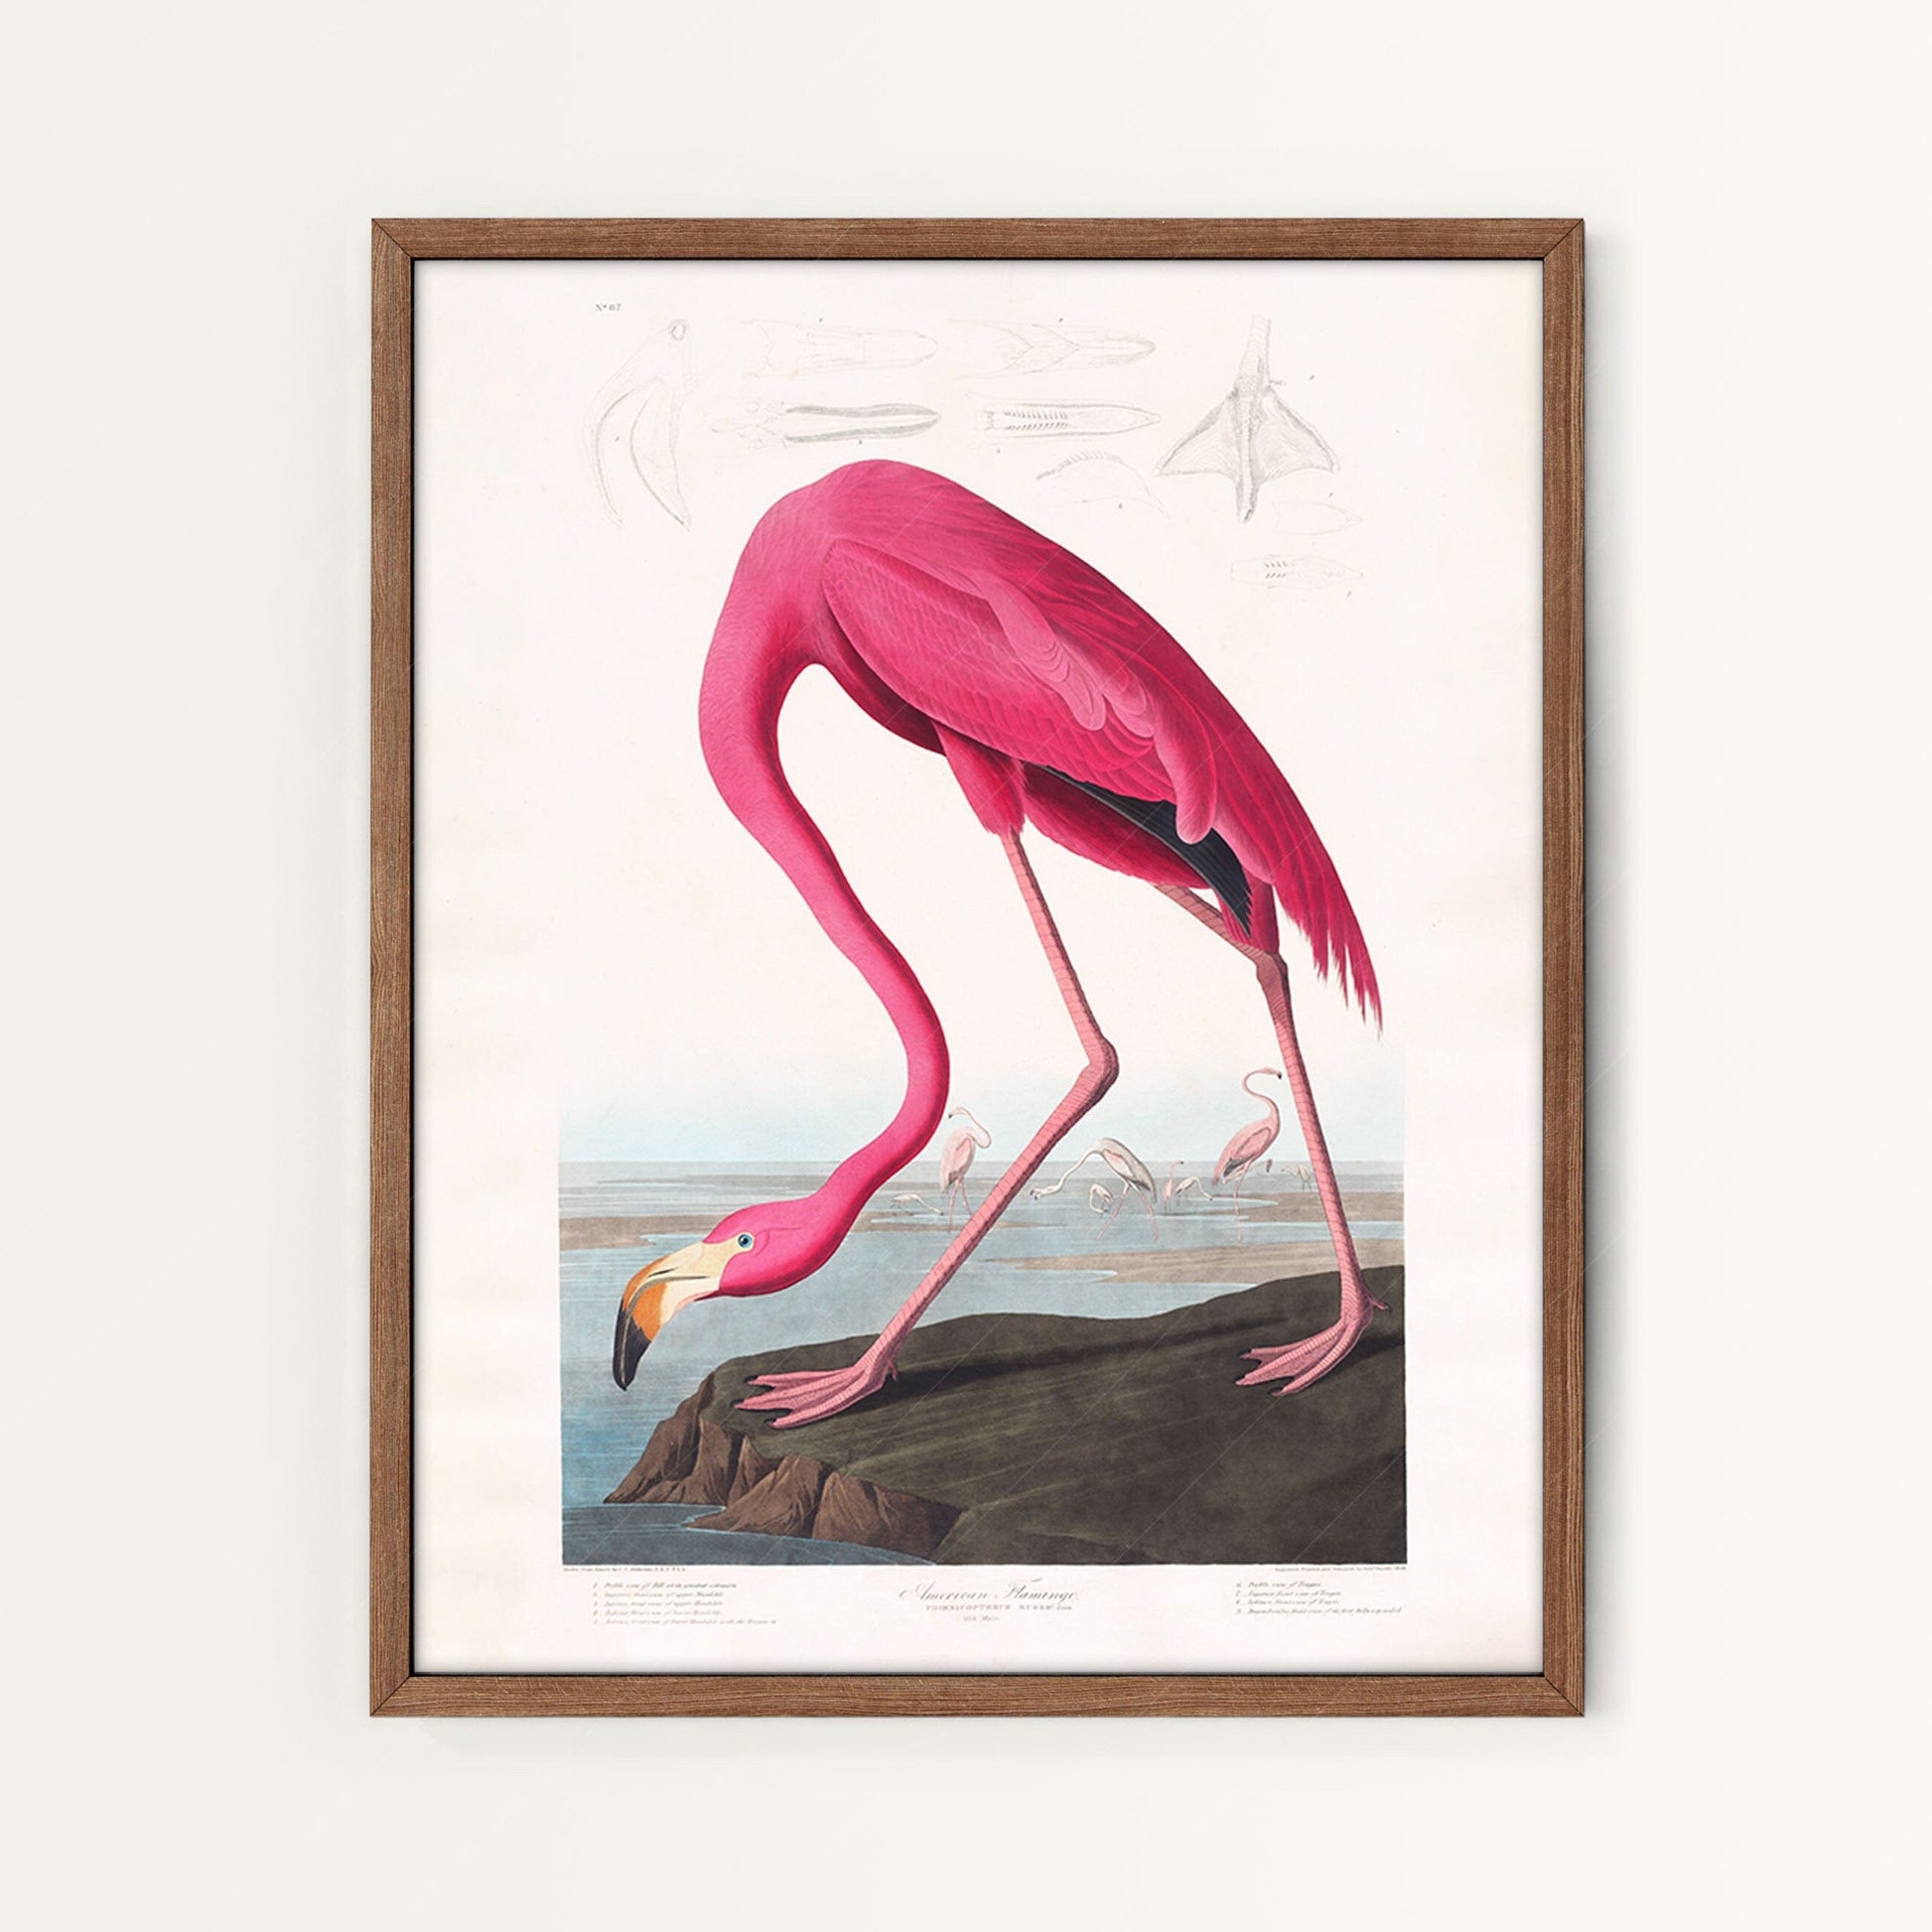 Home Poster Decor Gallery wall Vintage Gallery Wall, Flamingo Print, Mushroom Art, Whale Poster,  Butterfly Print, Farmhouse Gallery, Blueberry, Antique Set of 5 Prints